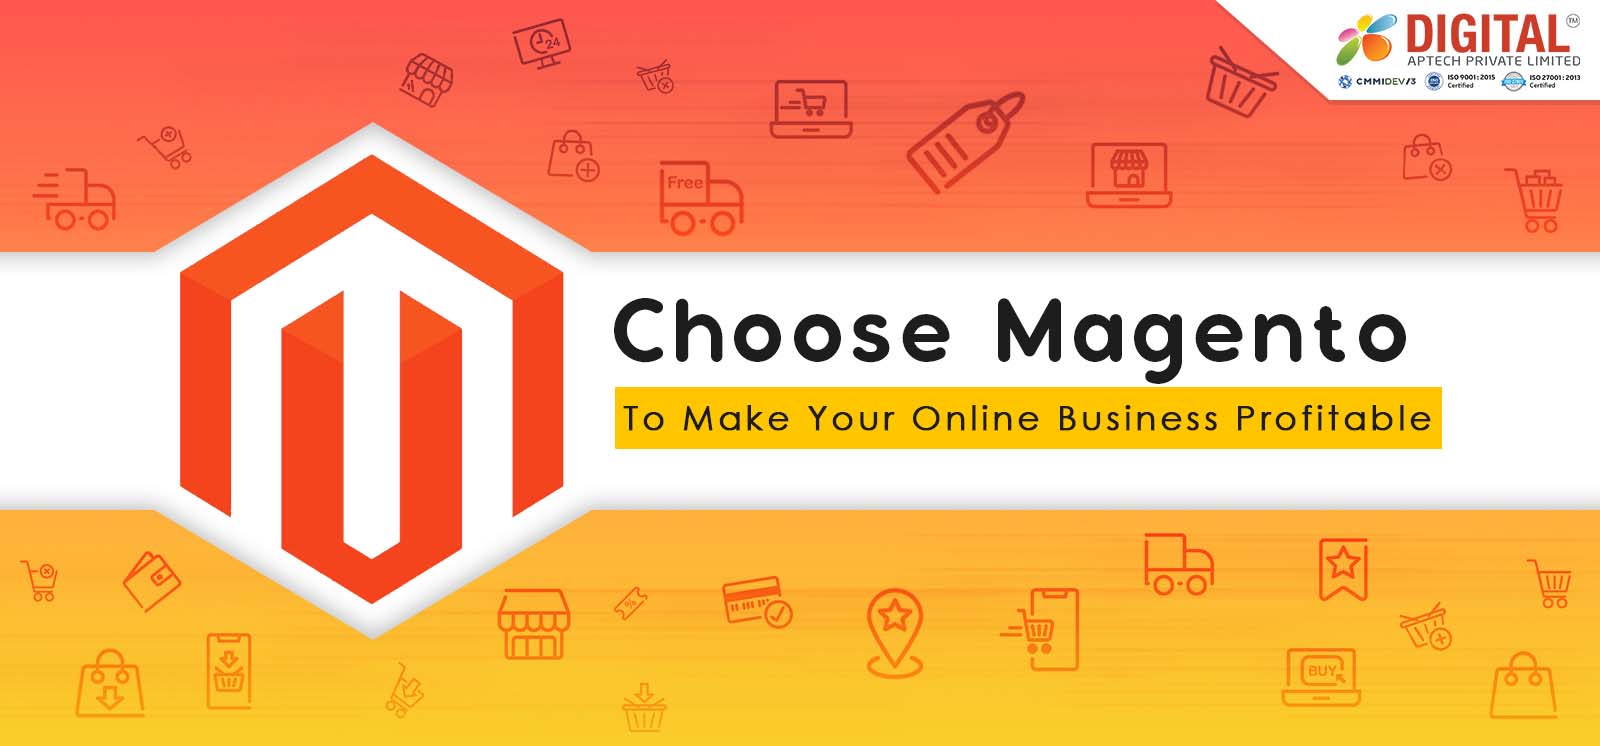 Choose Magento to Make Your Online Business Profitable